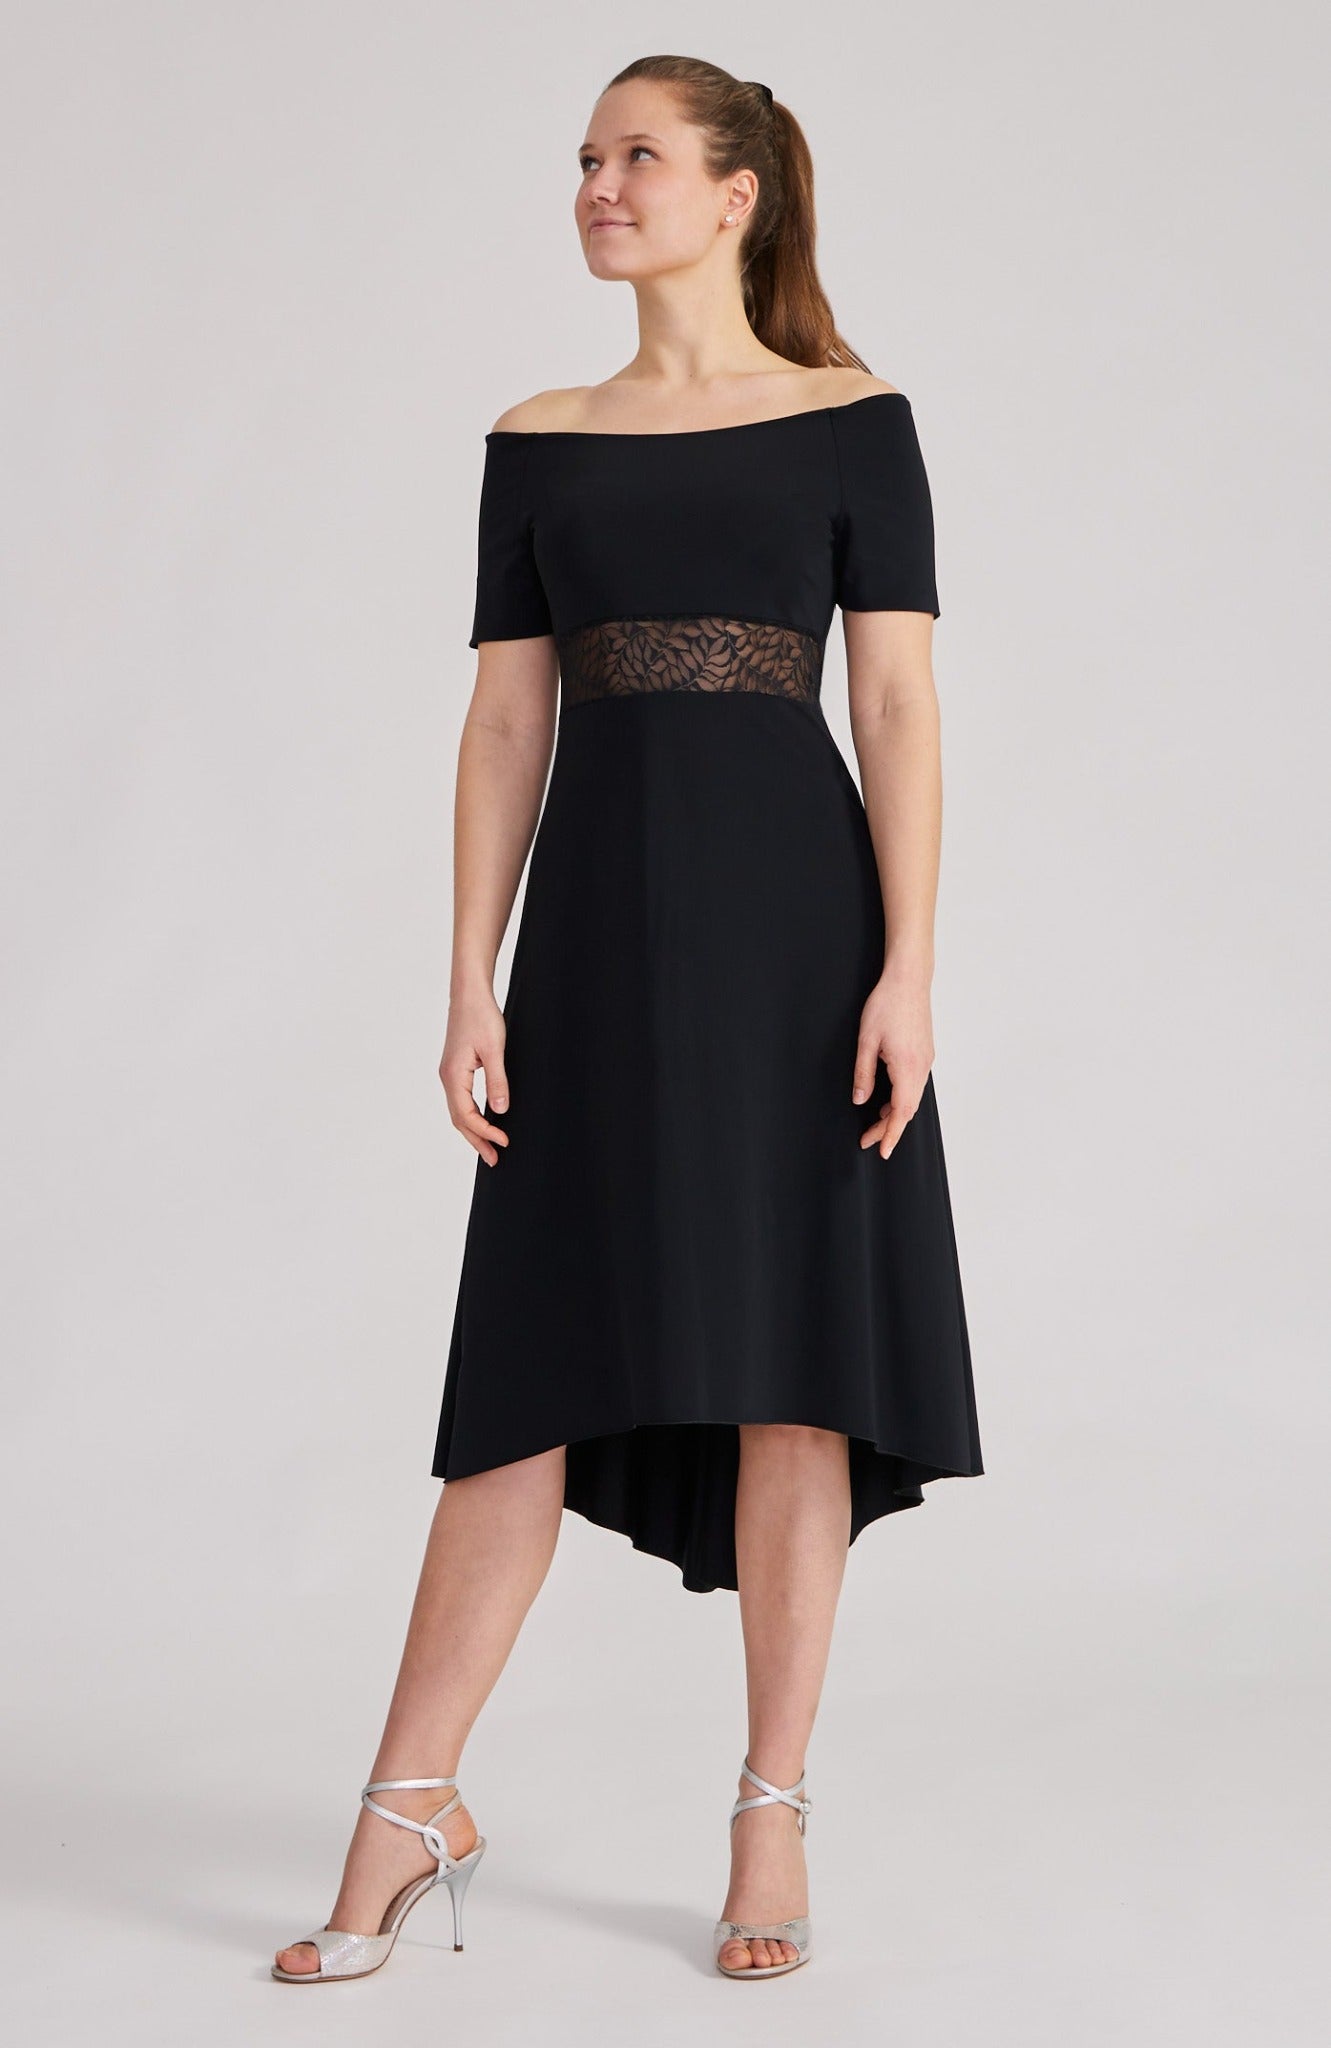 ALICIA - Black Tango Dress with Sleeves & Lace